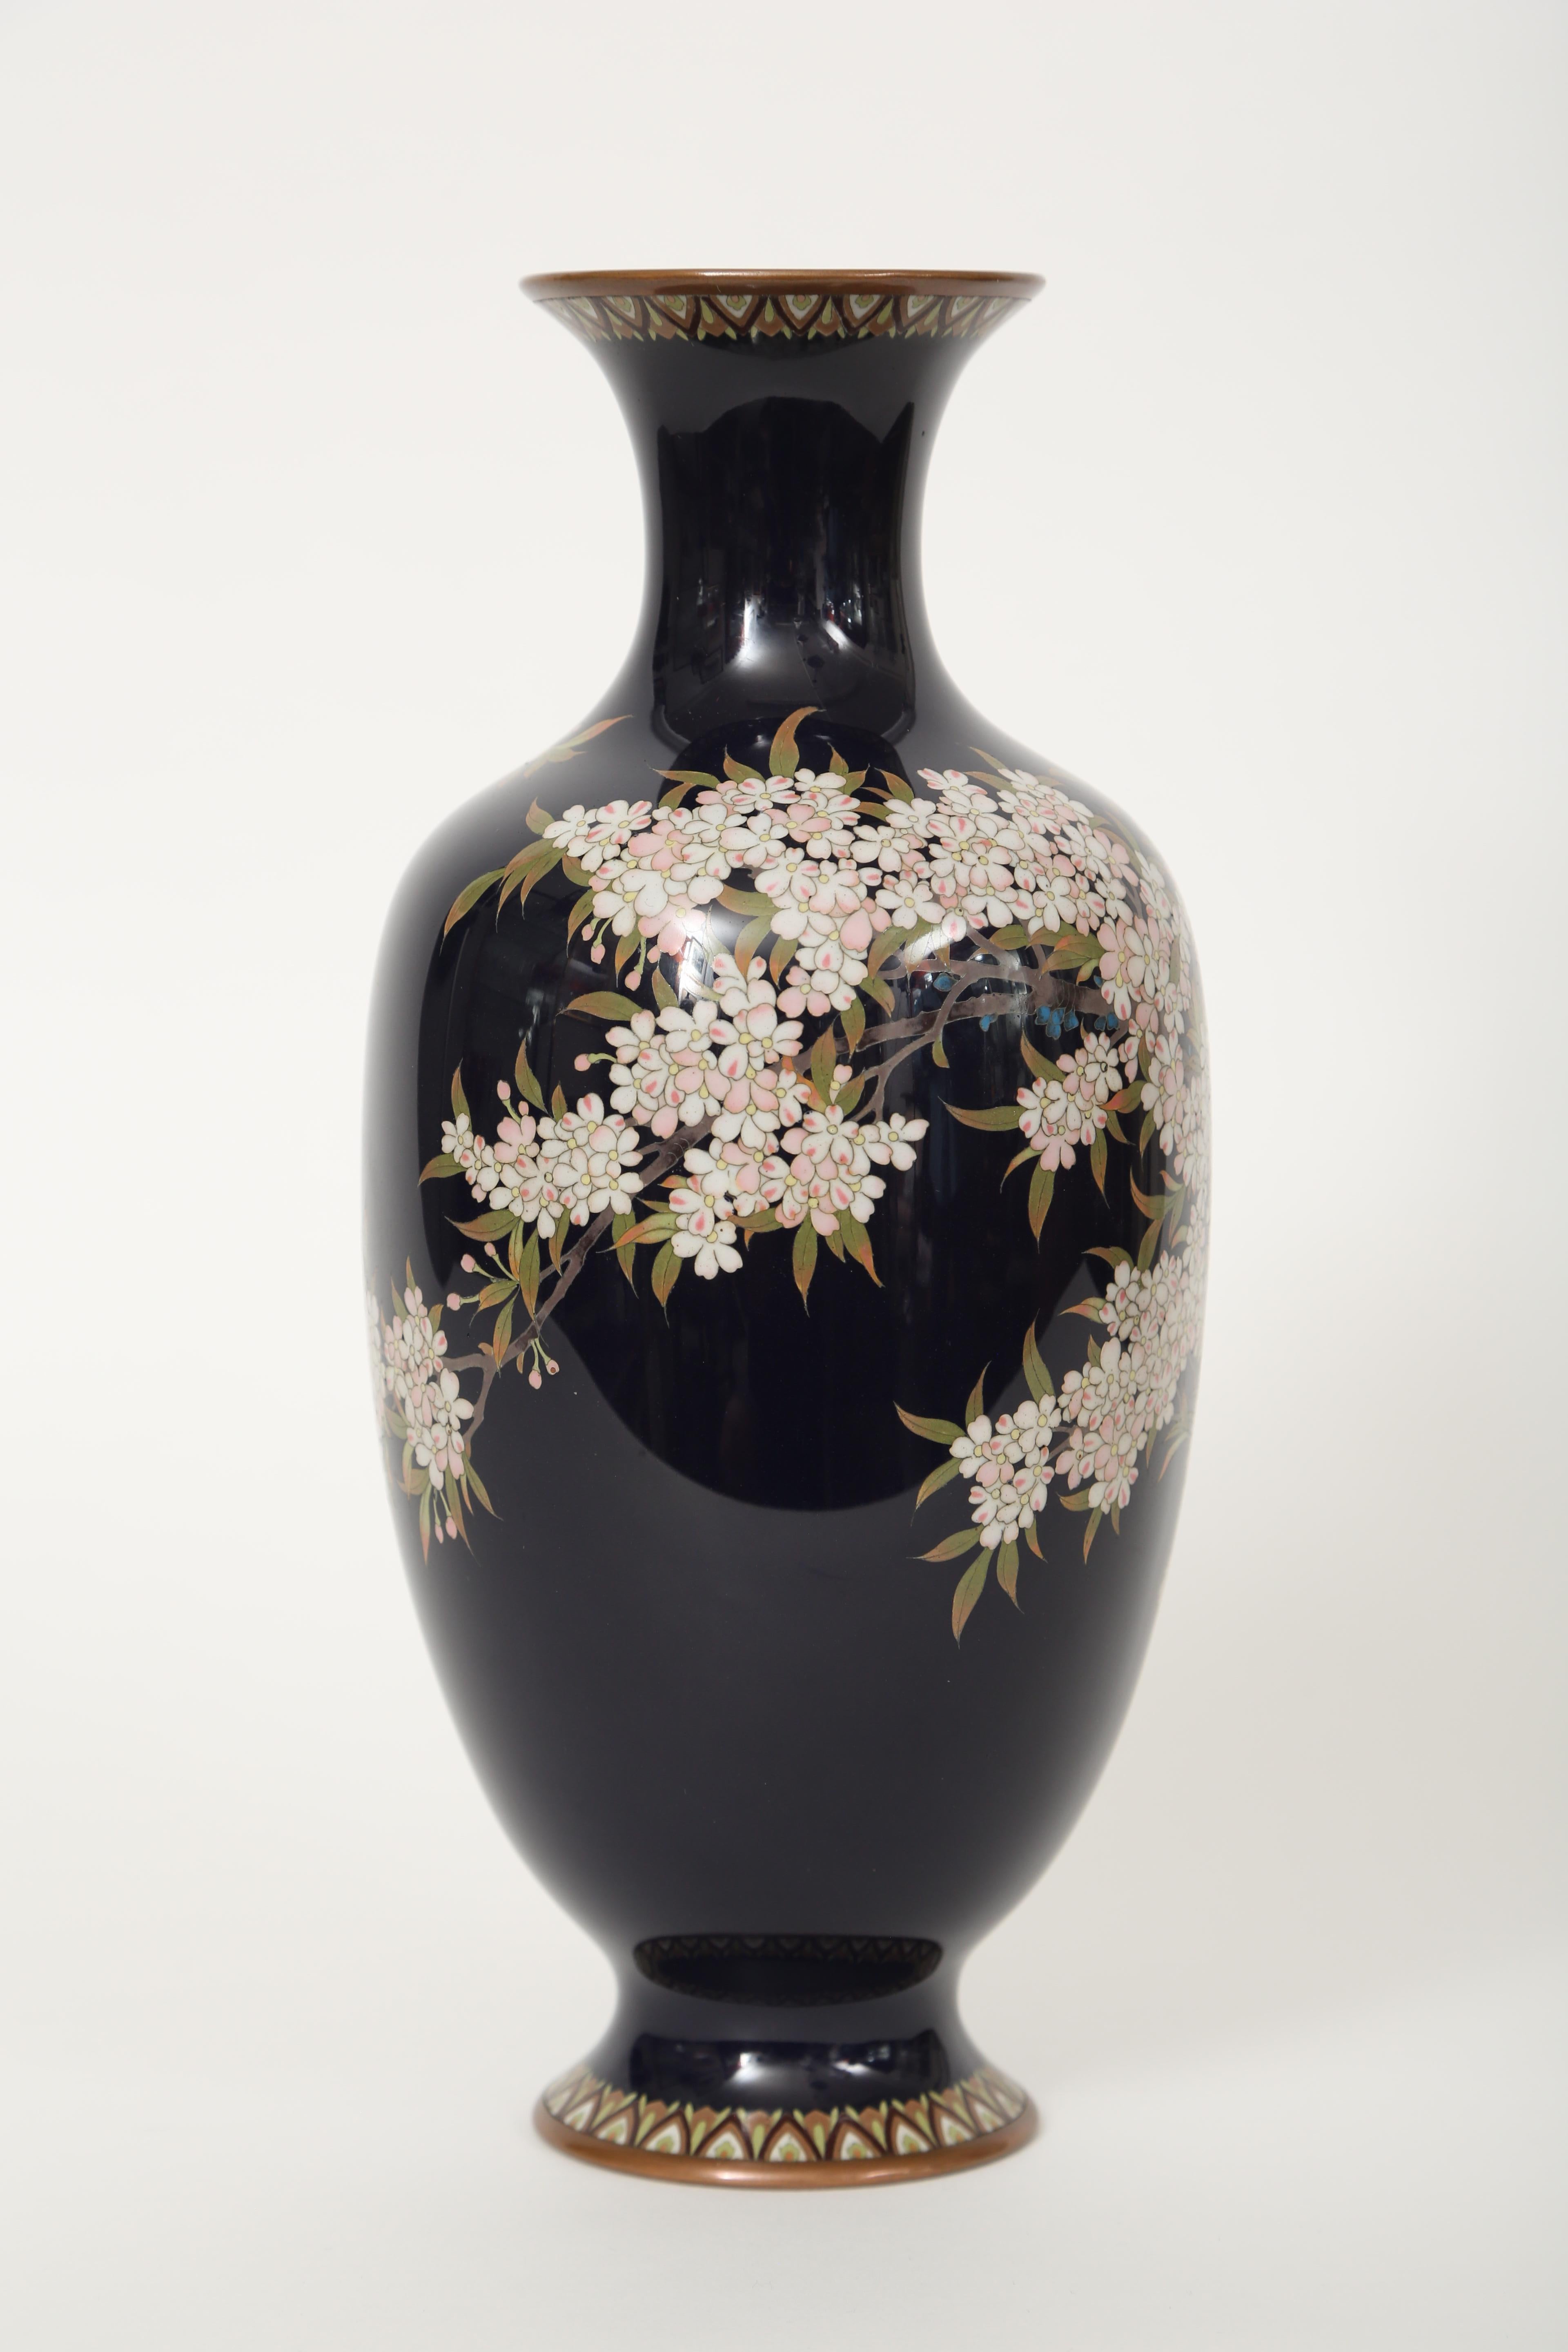 Tall Meiji period cloisonné vase depicting an exploding array of pink and white cherry blossoms wrapping around the body of the vase. The base also has some daisies and chrysanthemums. The floral display is set against a rich dark blue ground.